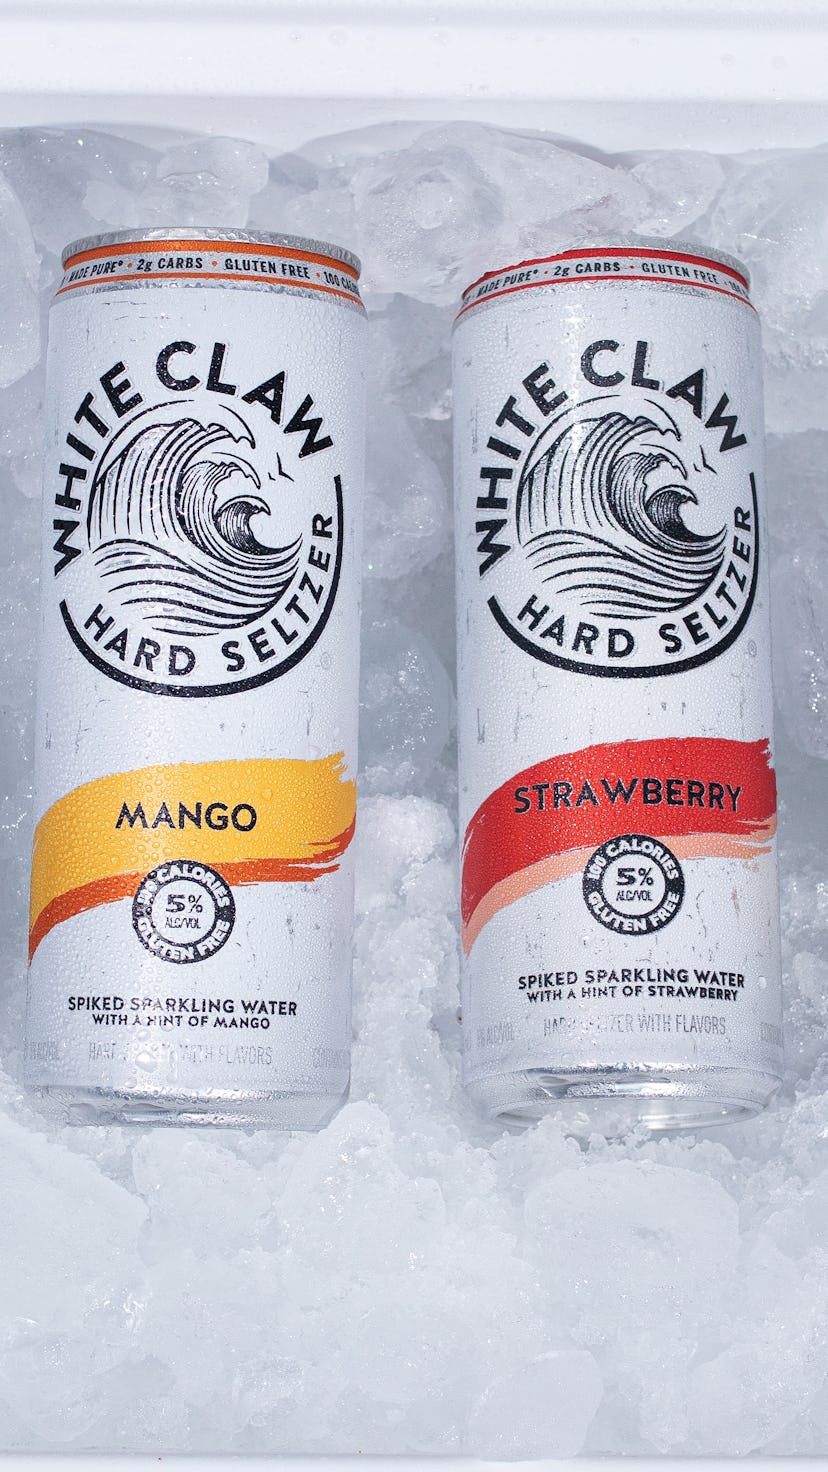 The hard seltzer has 5% ABV whereas White Claw Surge contains 8% ABV.